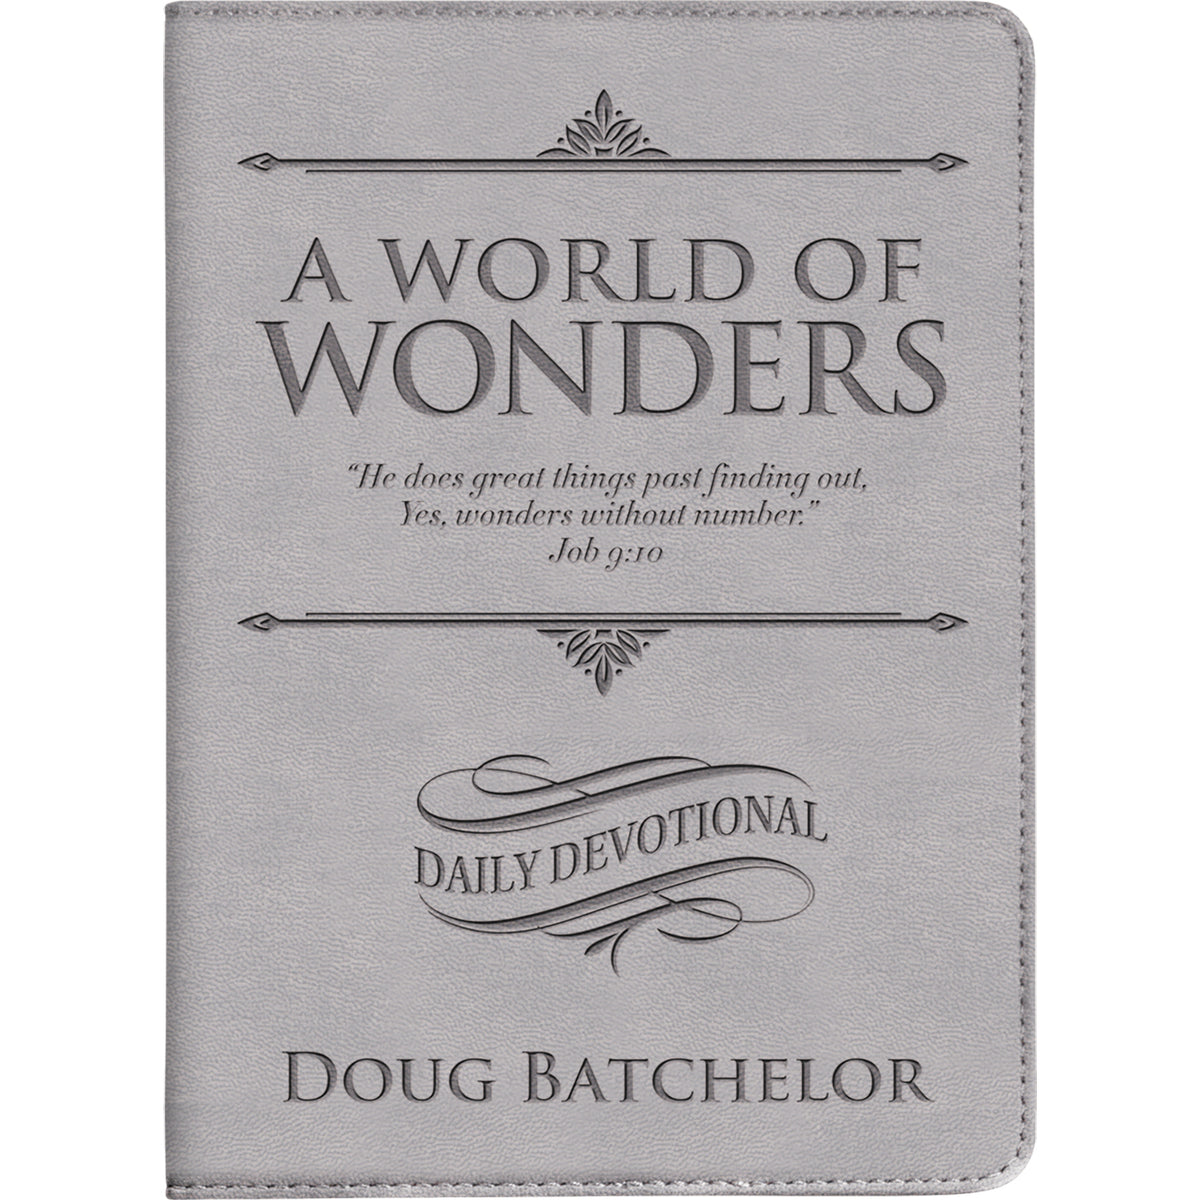 A World of Wonders: Daily Devotional